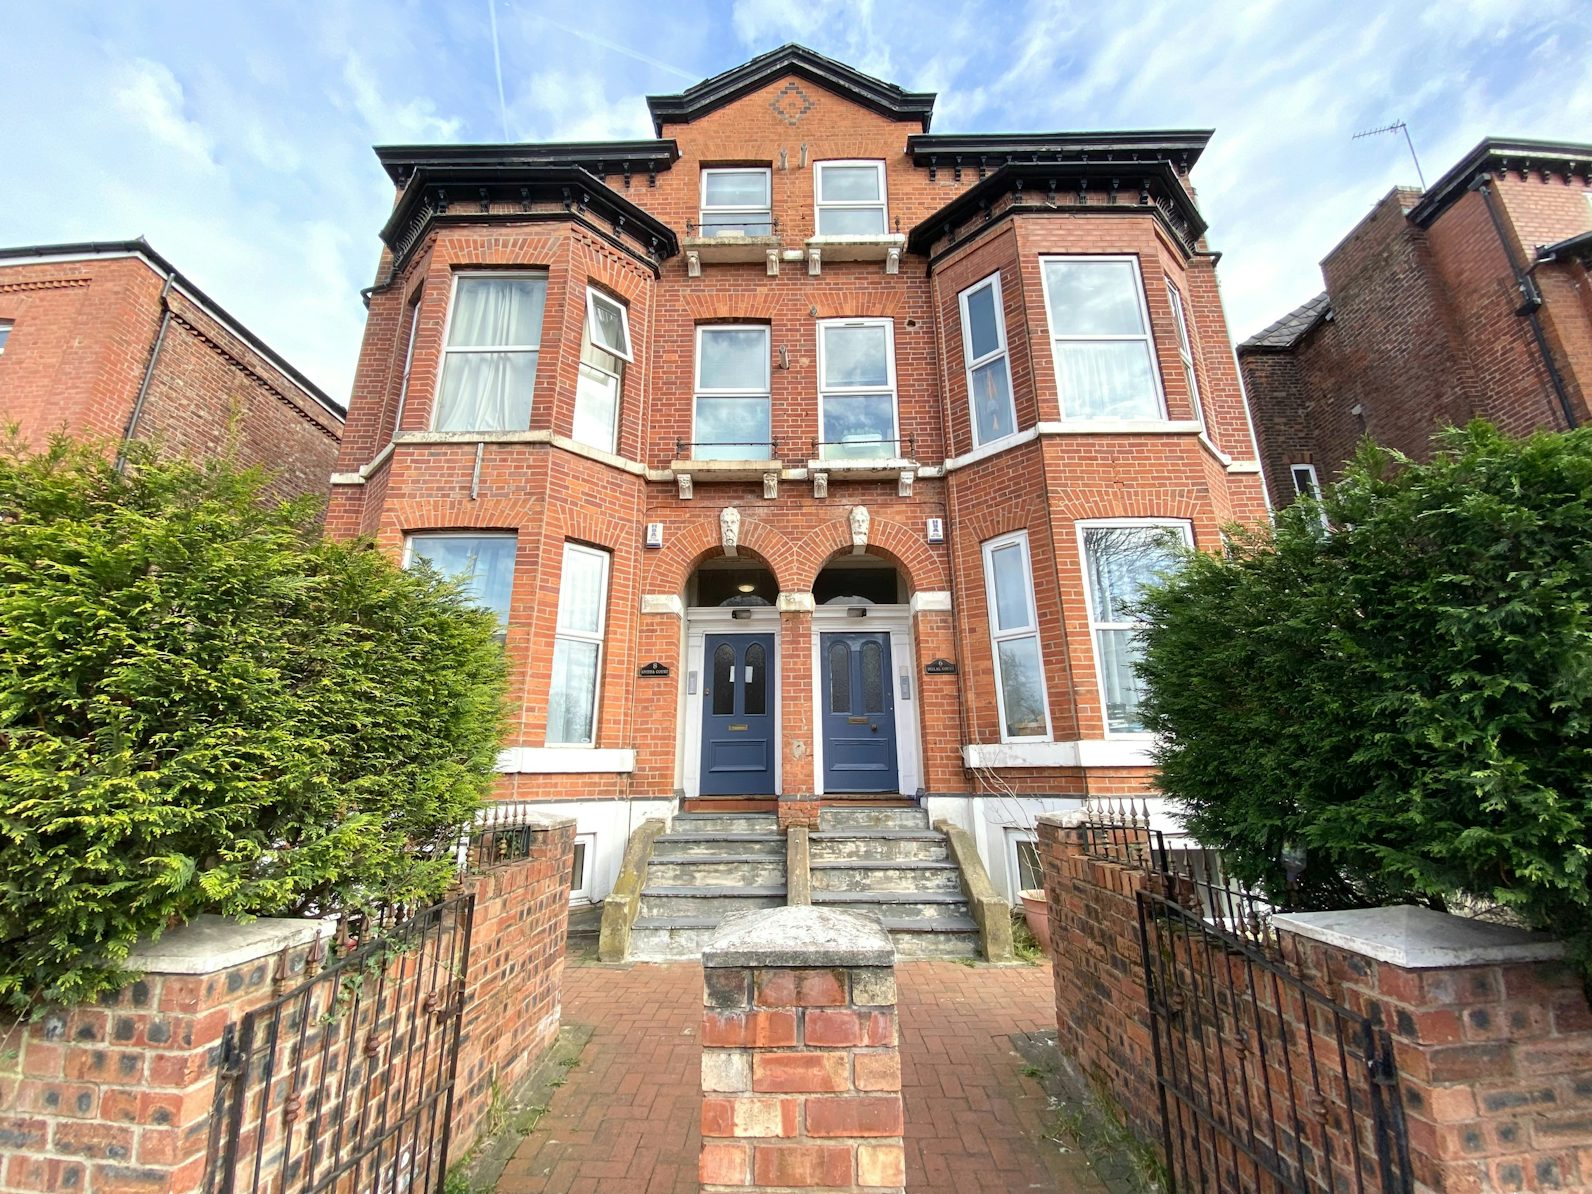 Flat to rent on Mauldeth Road West Manchester, M20